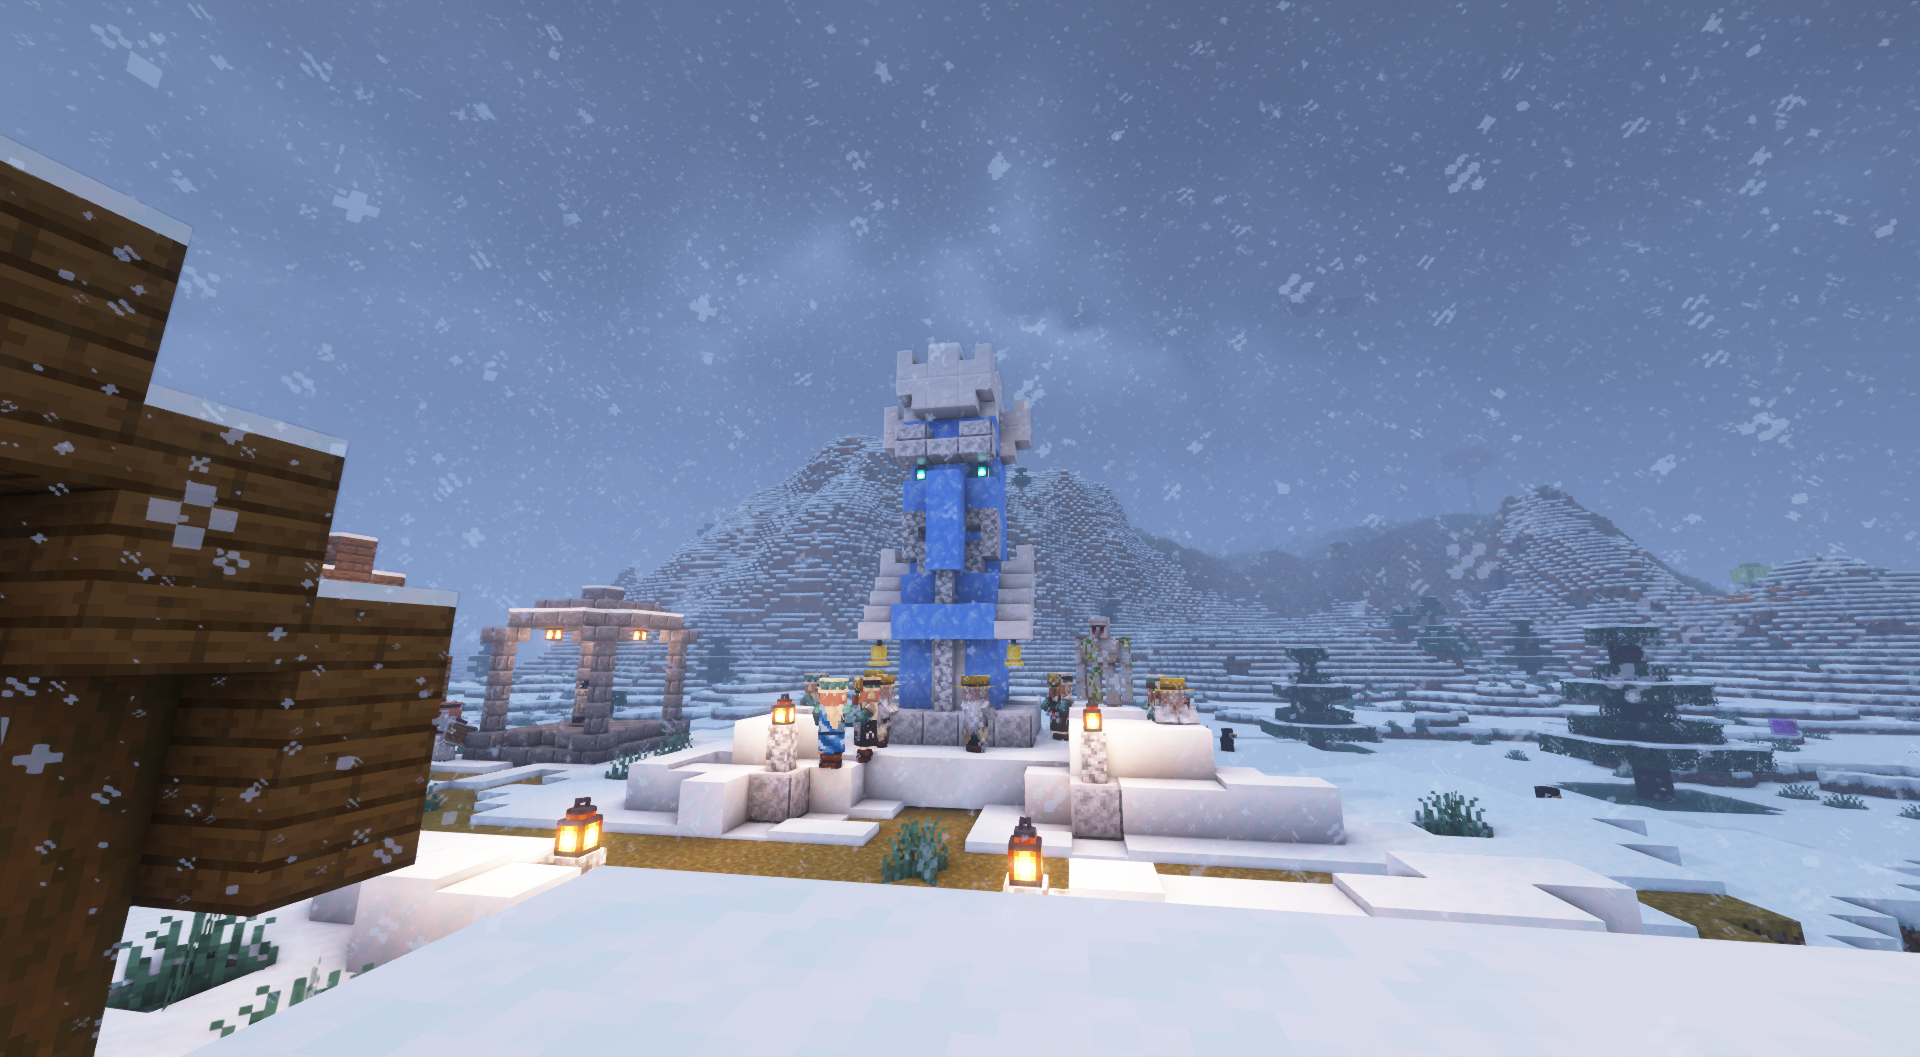 Icy Villager Statue